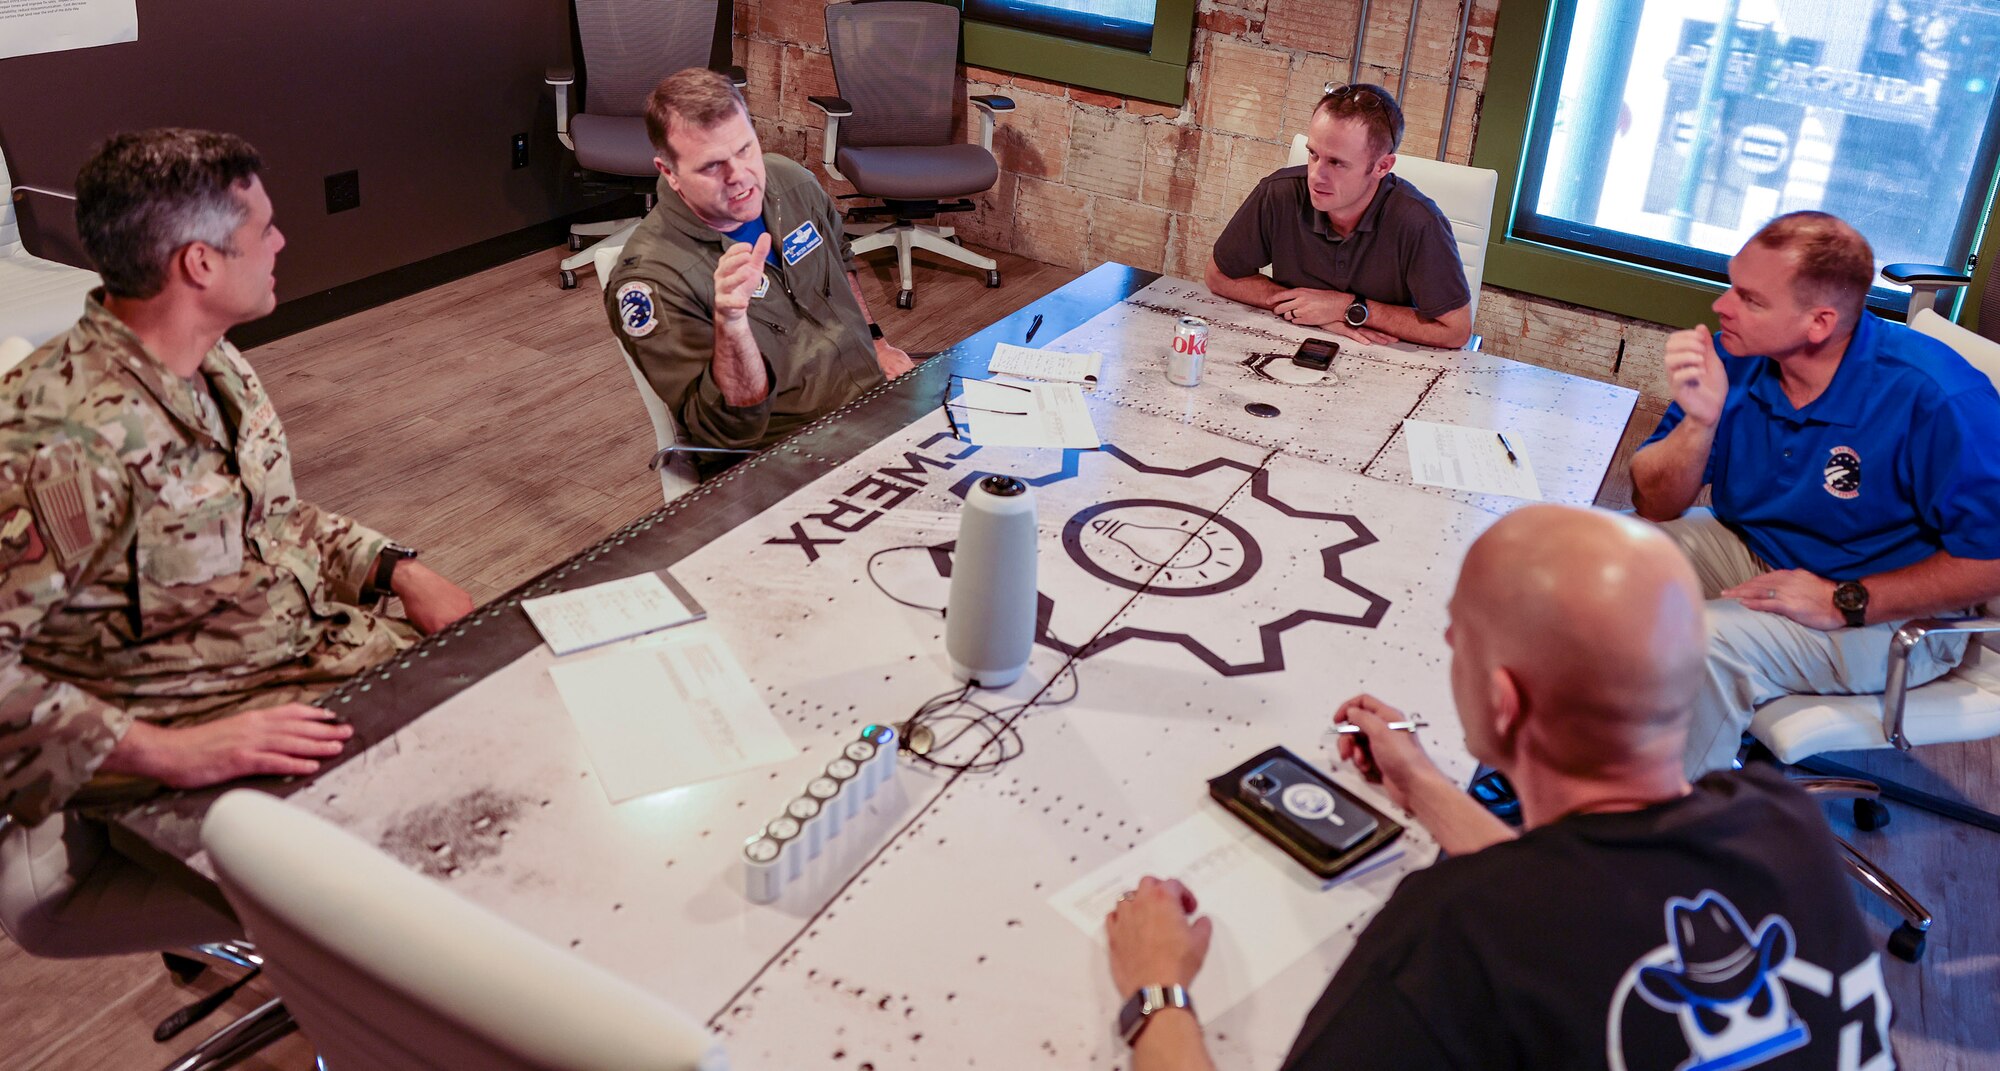 Judges representing the active-duty Air Force, Air National Guard and the Air Force Reserve deliberate on presentations given during Hack the Ranch, a hackathon hosted by Corsair Ranch, the Air Force Reserve Component’s software factory. Submissions were graded on functionality, usability, relevancy, and ability for rapid deployment. (U.S. Air National Guard photo by Senior Master Sgt. Charles Givens)